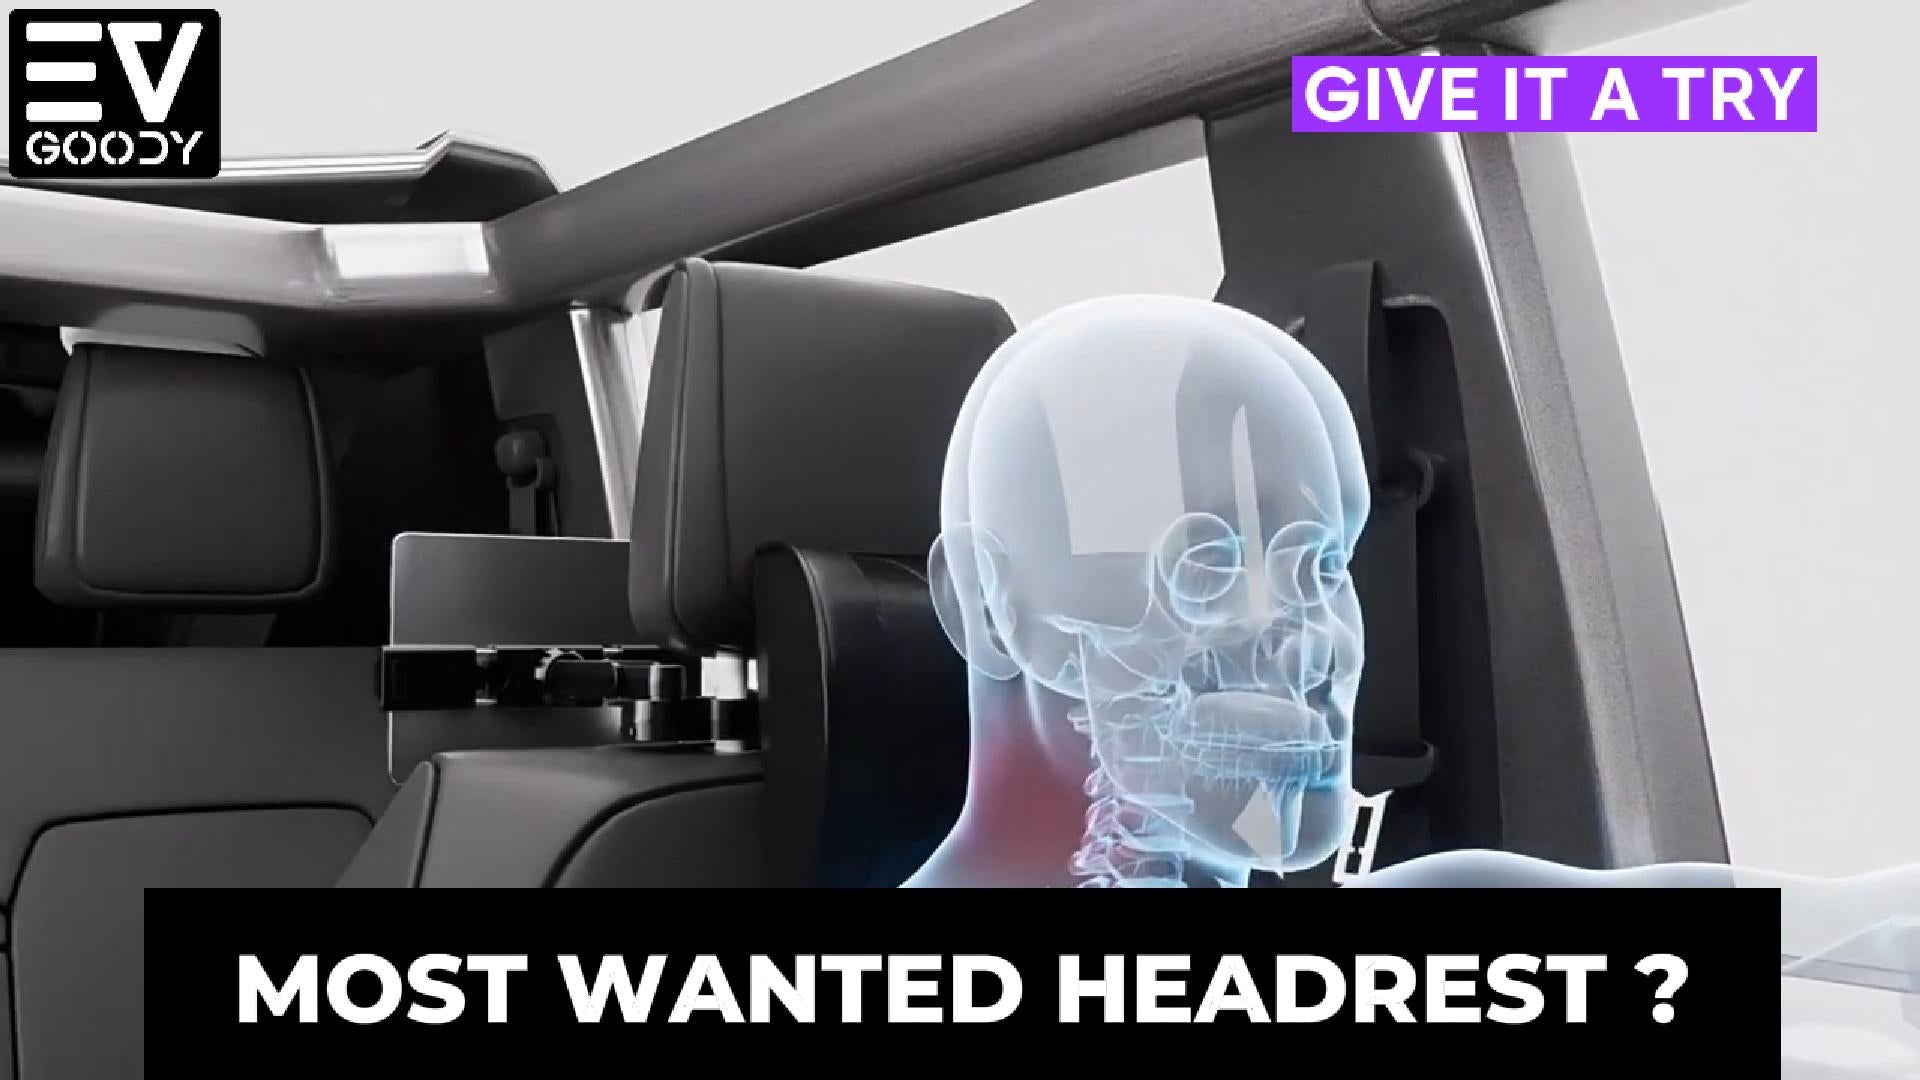 Most wanted car headrest for comfortable driving and neck pain relief. Comes with integrated mobile and tablet holder for backseat passengers.  